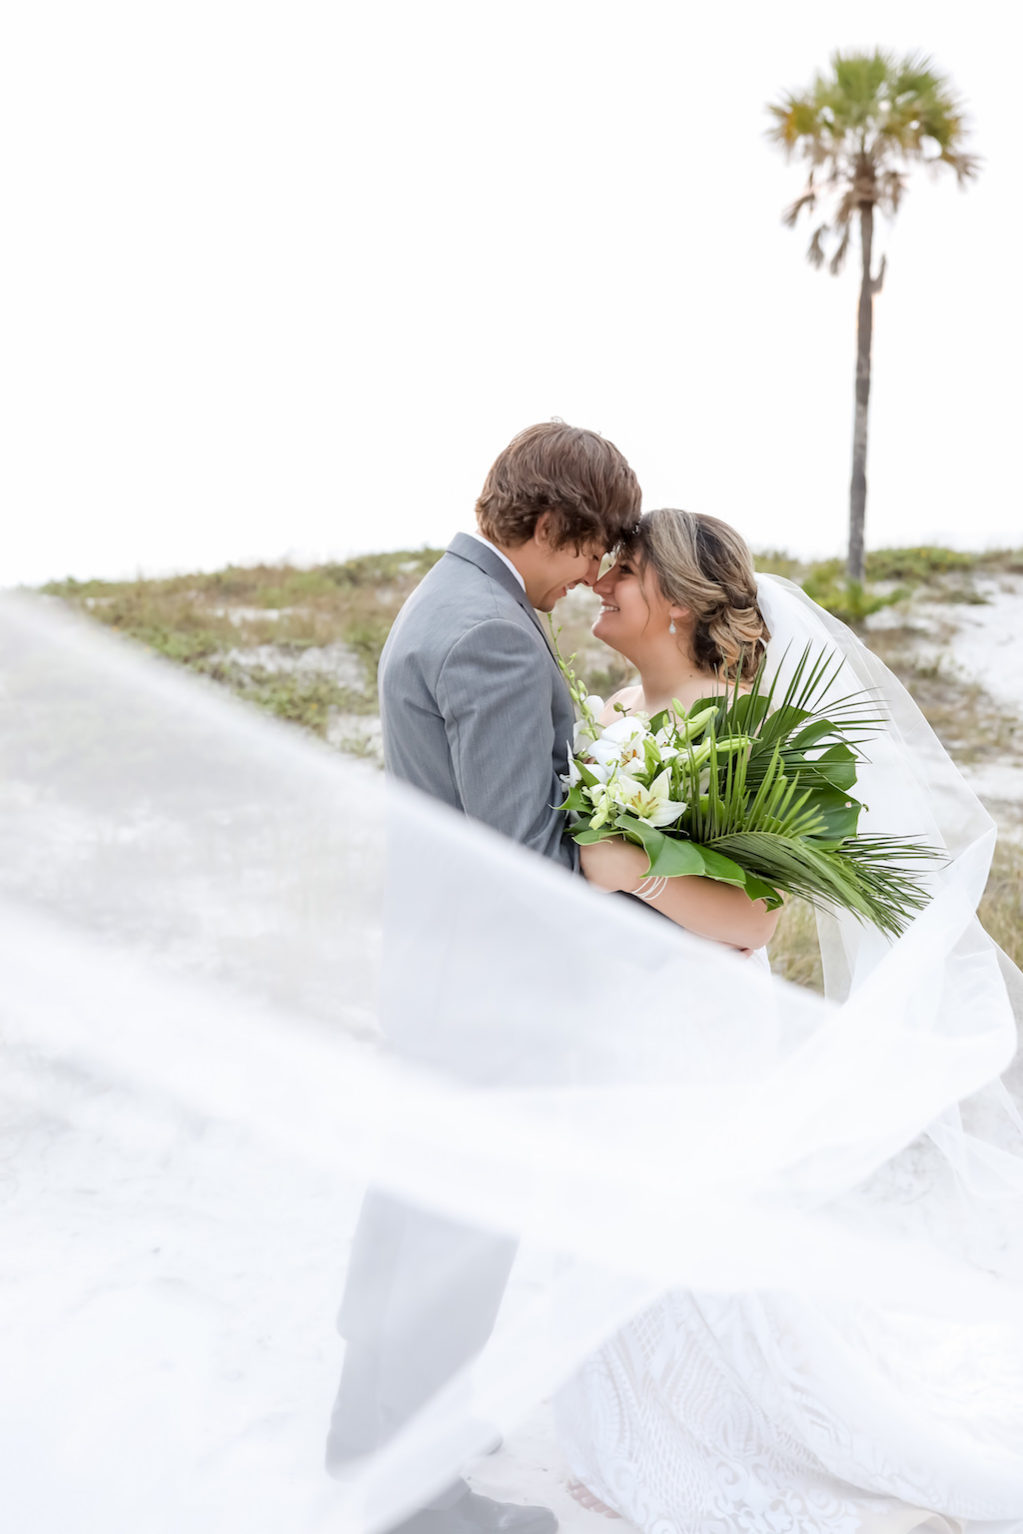 Clearwater Beach Bride and Groom Creative Photo with Cathedral Length Veil Blowing in Wind | Tampa Bay Wedding Photographer Lifelong Photography Studios